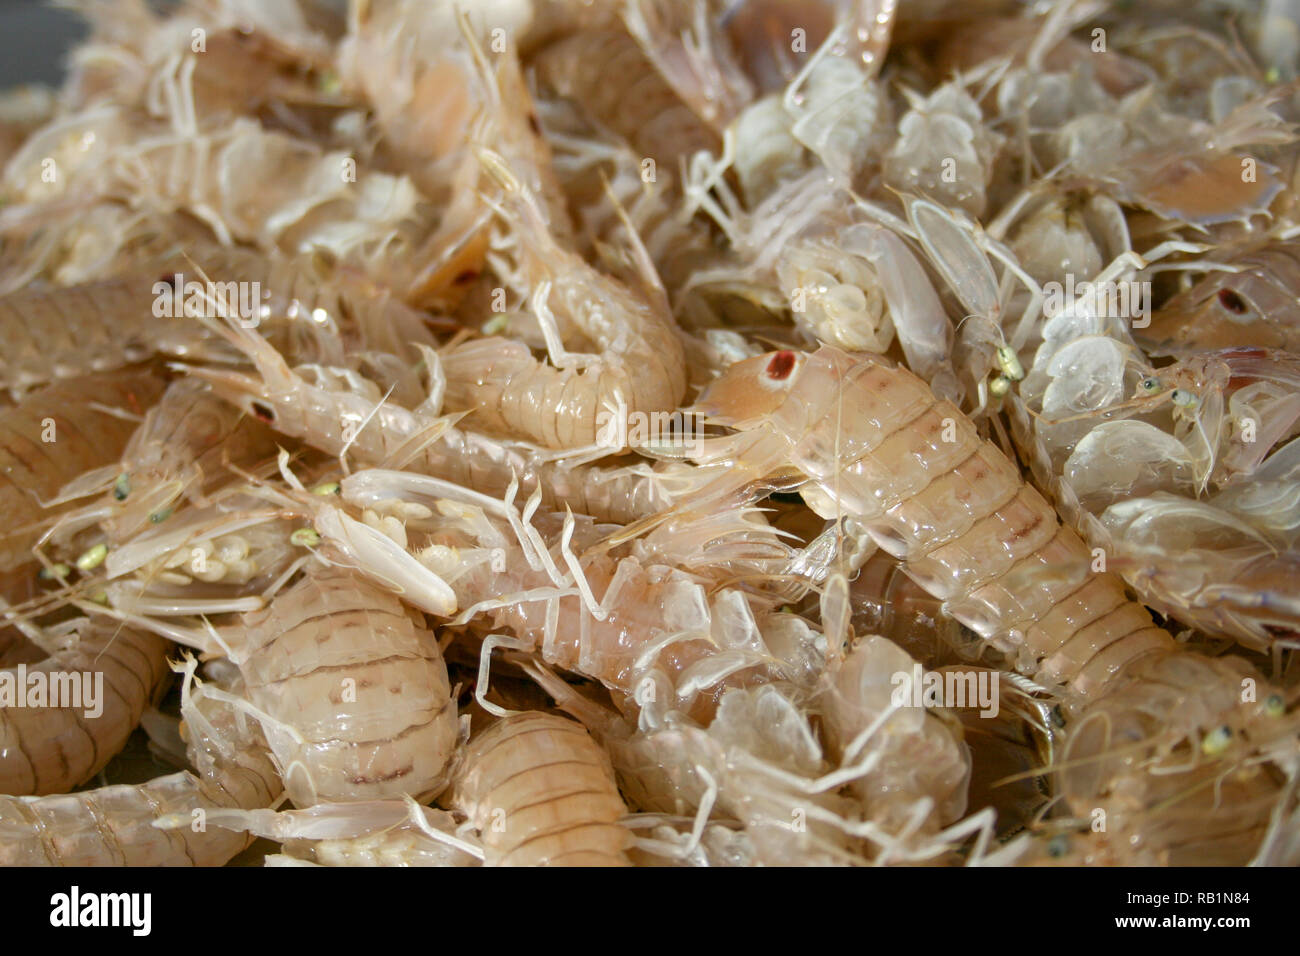 Squilla mantis, species of mantis shrimp found in shallow coastal areas of the Mediterranean Sea and the Eastern Atlantic Ocean: cicala or pacchero, f Stock Photo